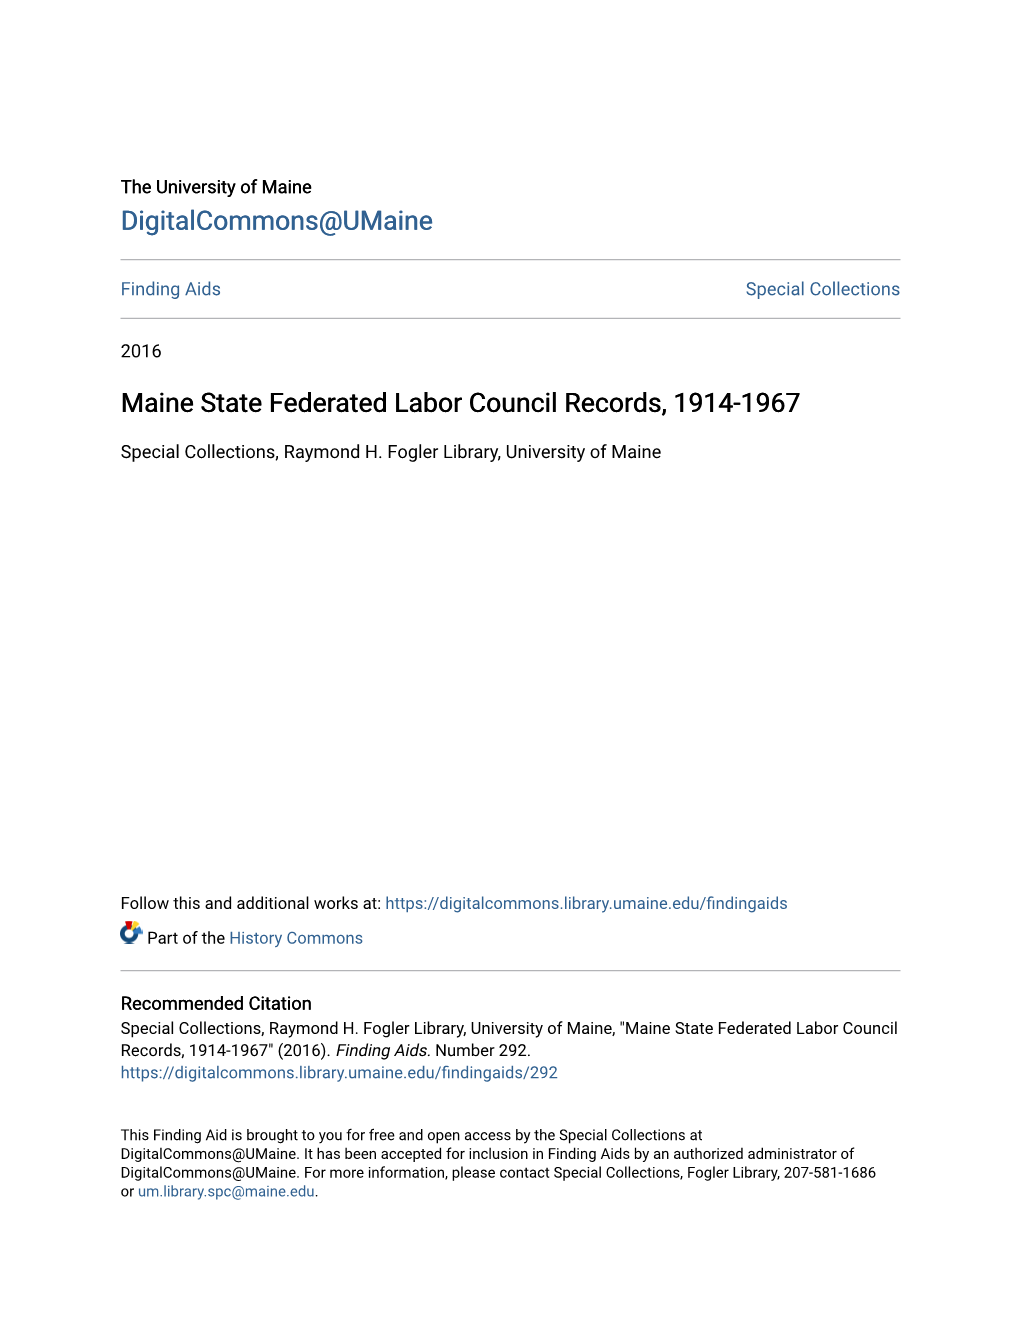 Maine State Federated Labor Council Records, 1914-1967